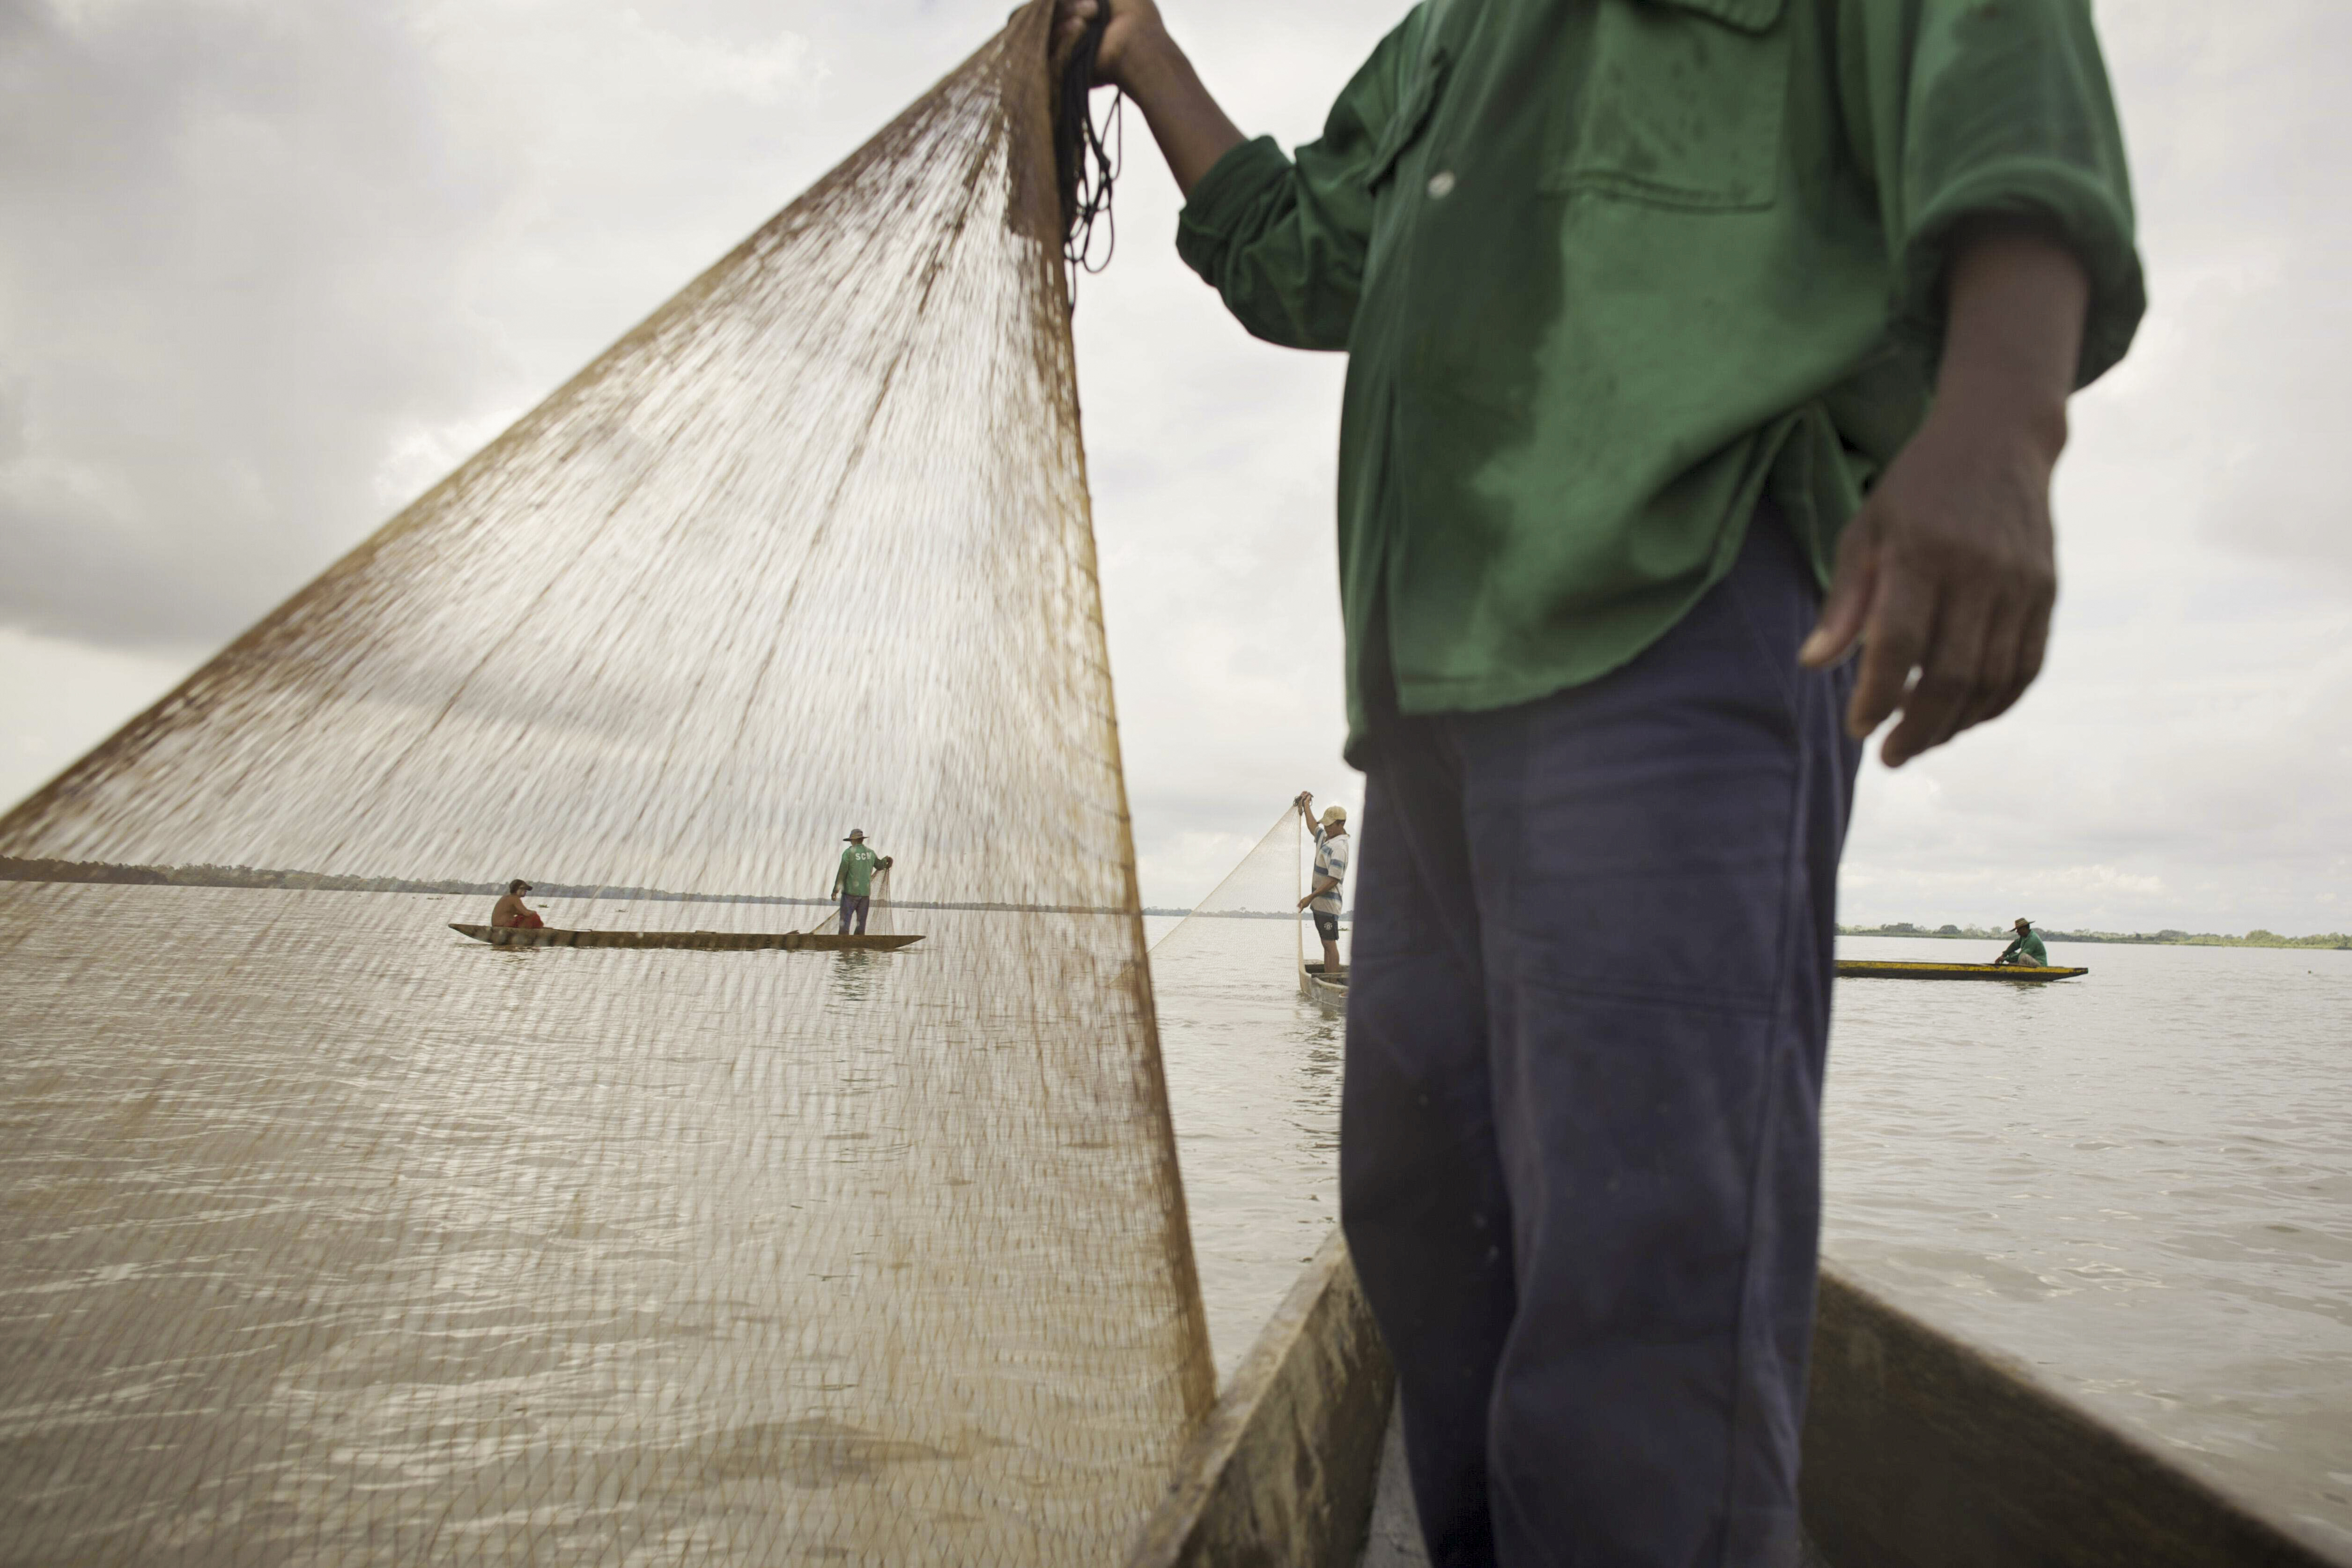  Person holding up a fishing net with boaters and fishermen in the background.